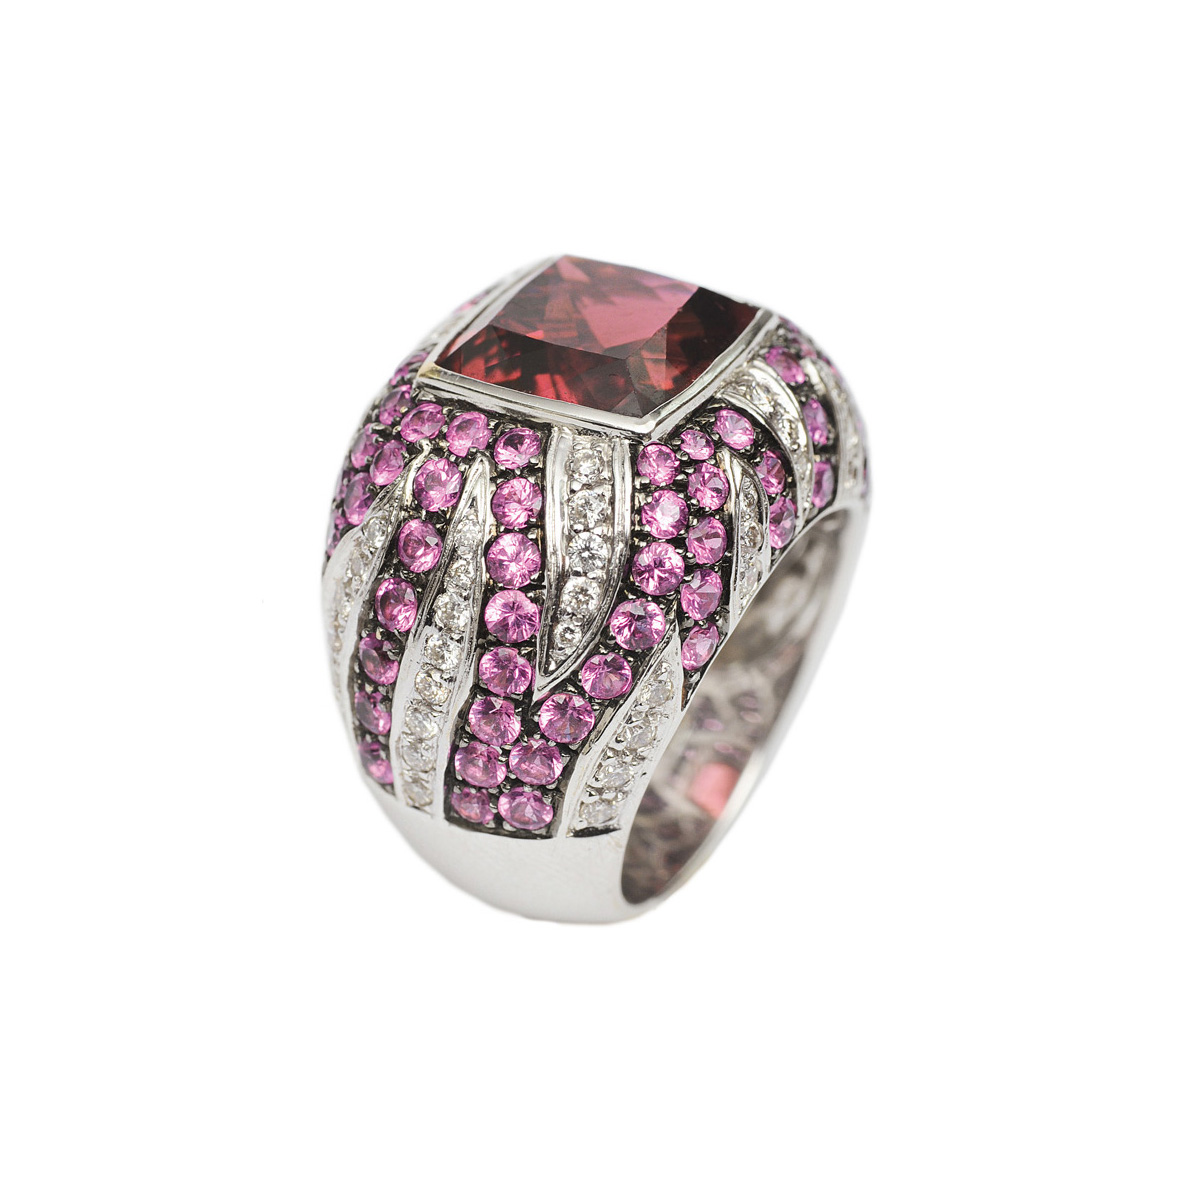 A colourful precious ring with pink-tourmaline, pink-sapphires and diamonds